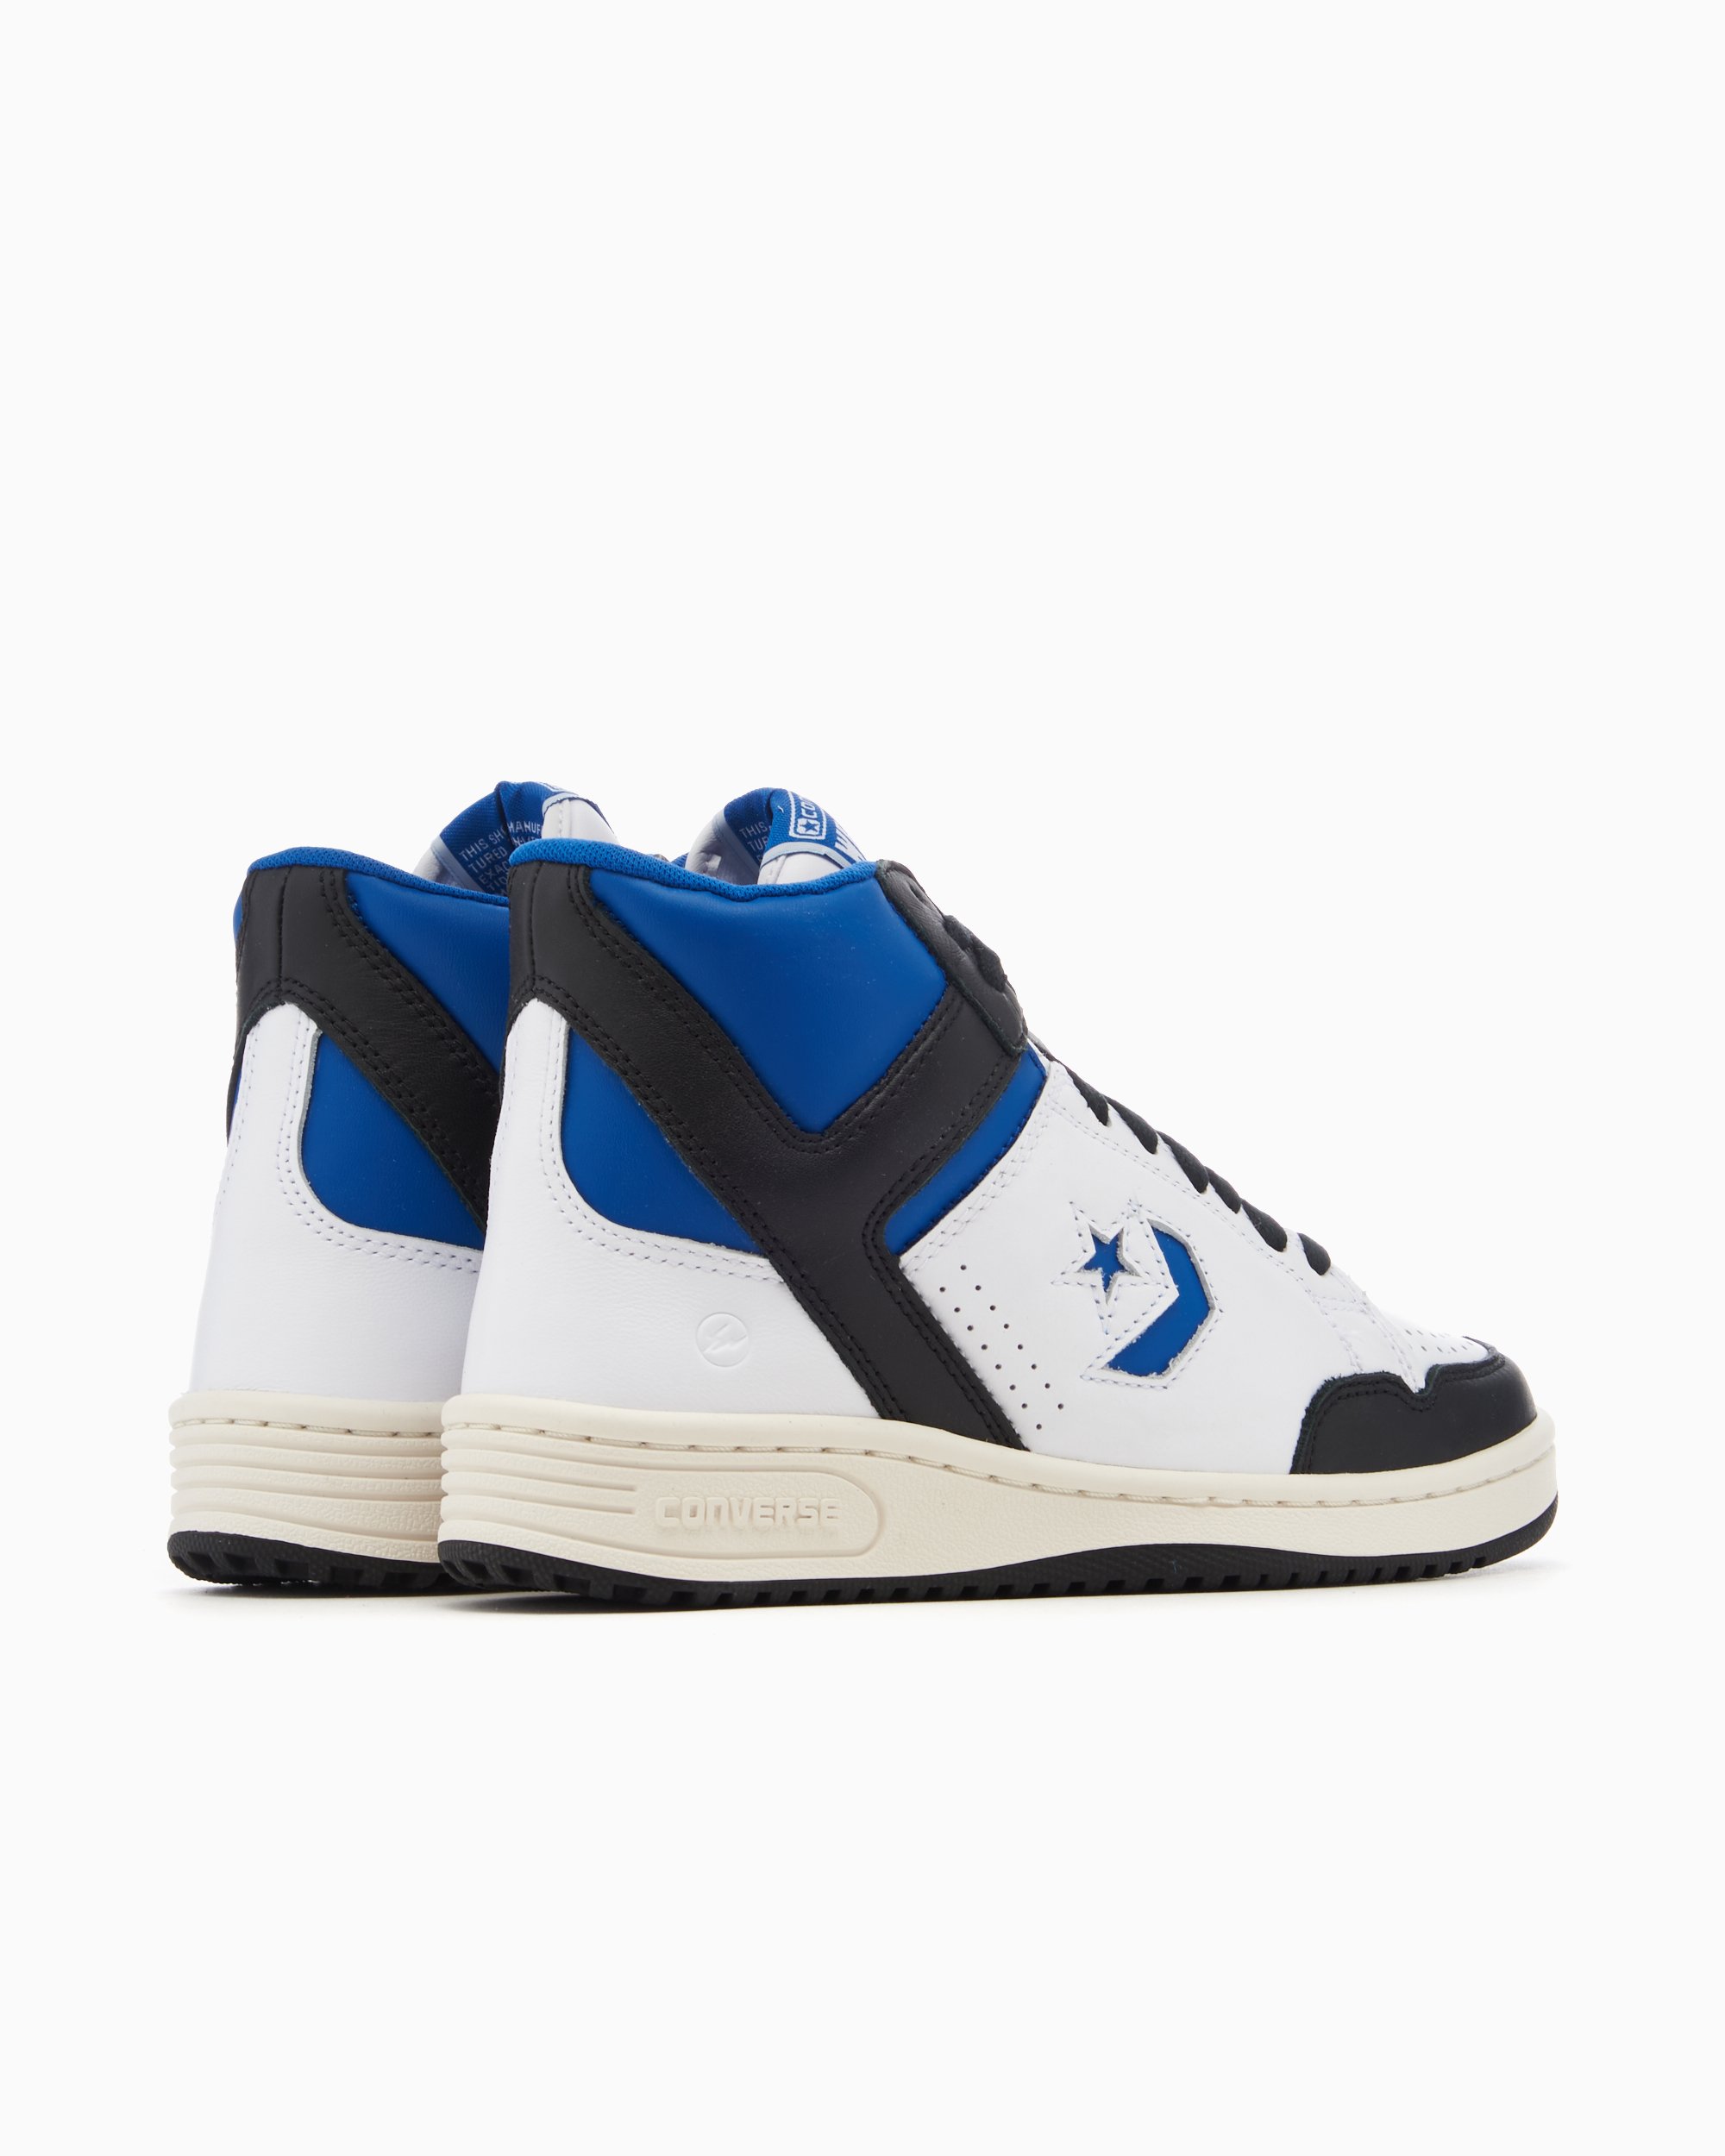 Converse x Fragment Weapon Mid White A06083C| Buy Online at